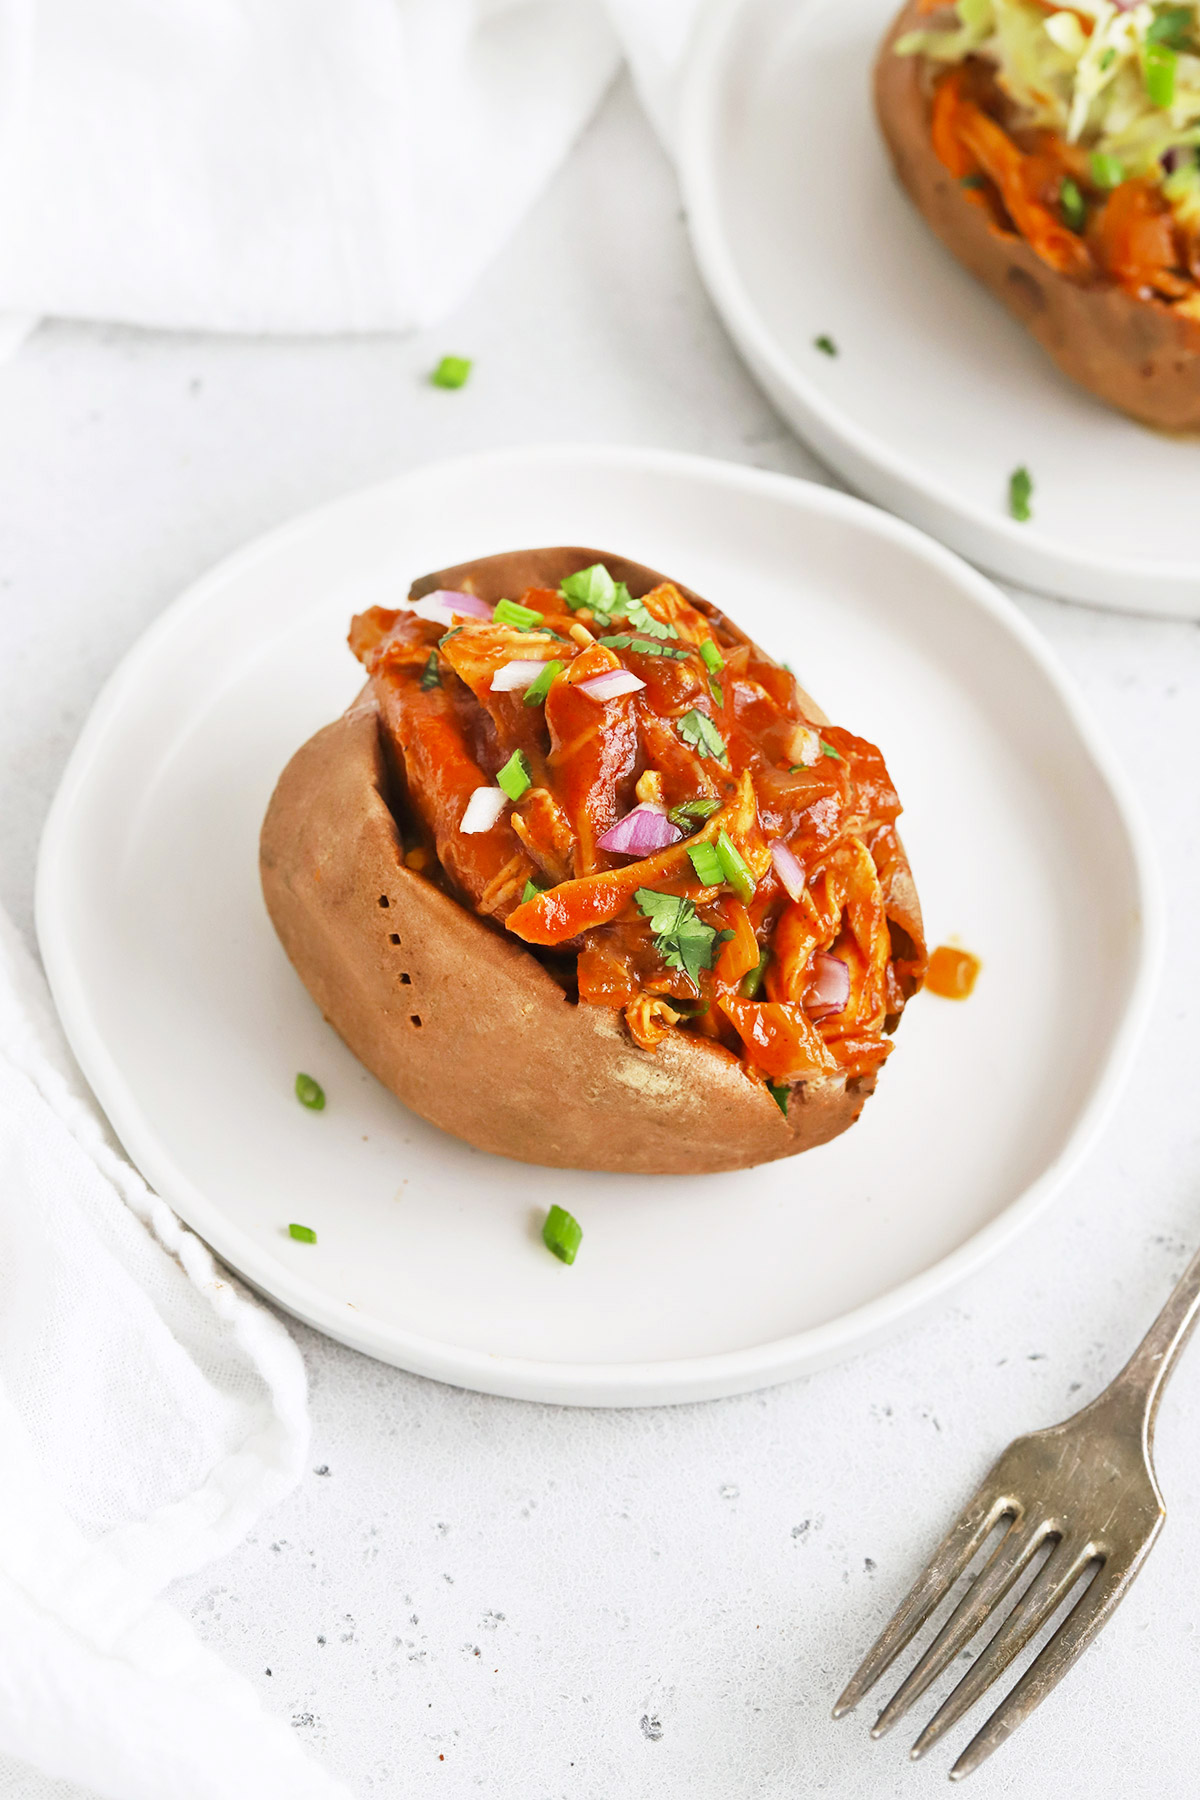 Front view of a BBQ Chicken Stuffed Baked Sweet Potato on a white plate